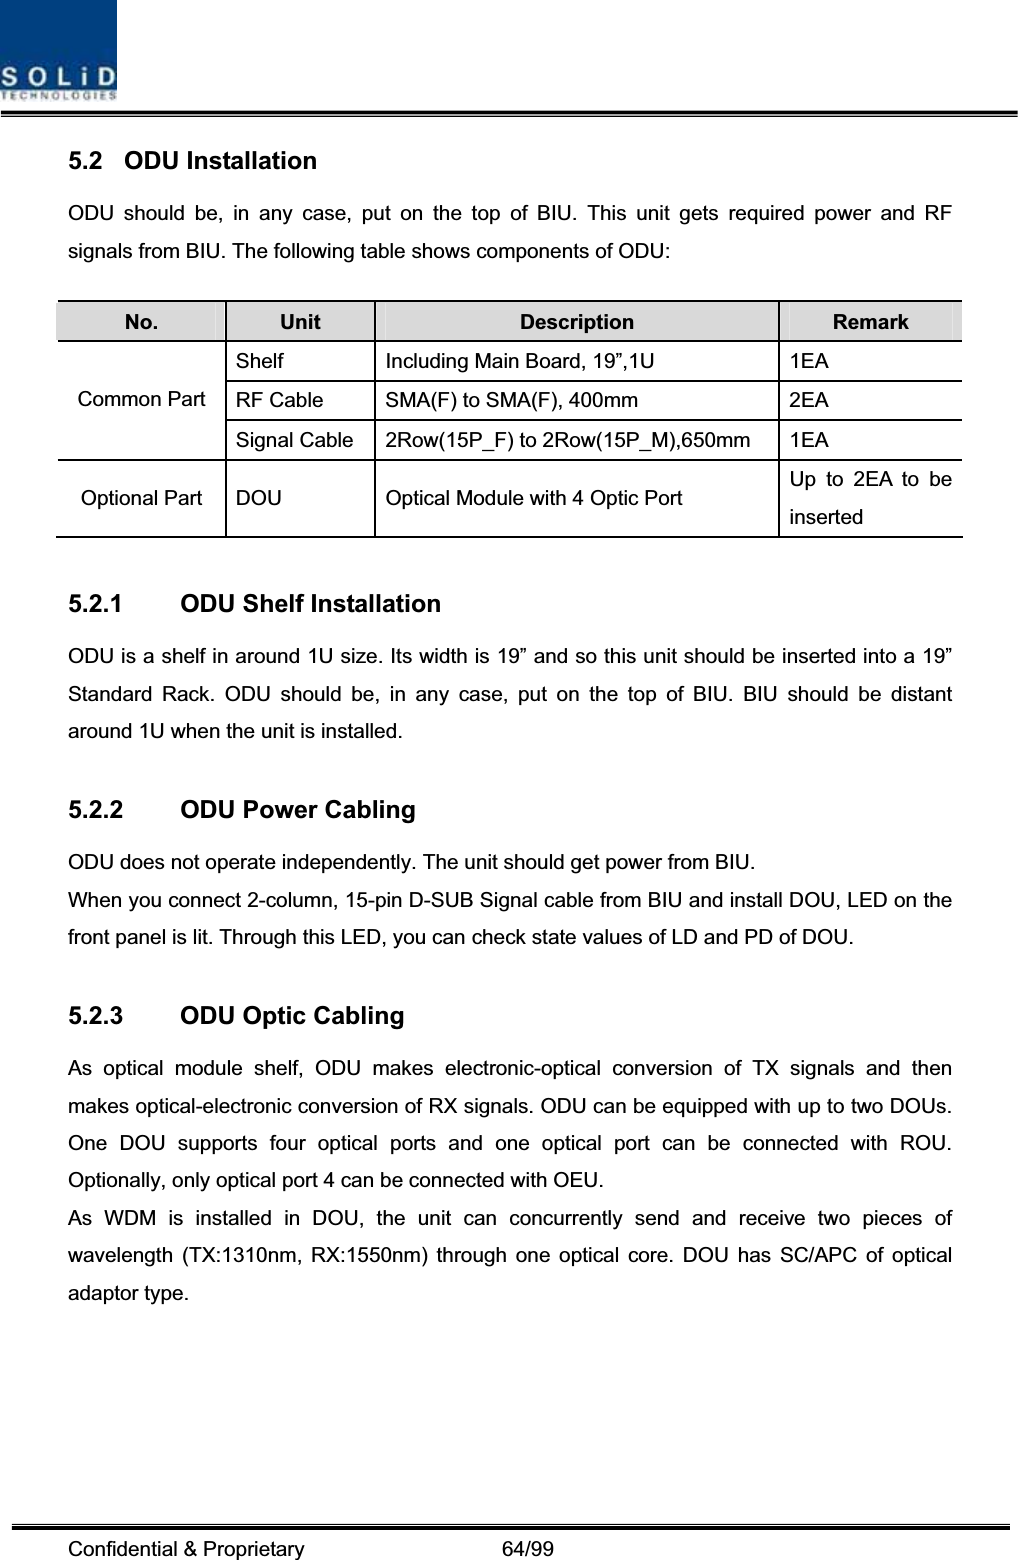 Confidential &amp; Proprietary                   64/99 5.2 ODU Installation ODU should be, in any case, put on the top of BIU. This unit gets required power and RF signals from BIU. The following table shows components of ODU: No. Unit Description  Remark Shelf  Including Main Board, 19”,1U  1EA RF Cable  SMA(F) to SMA(F), 400mm  2EA Common Part Signal Cable  2Row(15P_F) to 2Row(15P_M),650mm  1EA Optional Part  DOU  Optical Module with 4 Optic Port  Up to 2EA to be inserted 5.2.1  ODU Shelf Installation ODU is a shelf in around 1U size. Its width is 19” and so this unit should be inserted into a 19” Standard Rack. ODU should be, in any case, put on the top of BIU. BIU should be distant around 1U when the unit is installed. 5.2.2  ODU Power Cabling ODU does not operate independently. The unit should get power from BIU. When you connect 2-column, 15-pin D-SUB Signal cable from BIU and install DOU, LED on the front panel is lit. Through this LED, you can check state values of LD and PD of DOU. 5.2.3  ODU Optic Cabling As optical module shelf, ODU makes electronic-optical conversion of TX signals and then makes optical-electronic conversion of RX signals. ODU can be equipped with up to two DOUs. One DOU supports four optical ports and one optical port can be connected with ROU. Optionally, only optical port 4 can be connected with OEU. As WDM is installed in DOU, the unit can concurrently send and receive two pieces of wavelength (TX:1310nm, RX:1550nm) through one optical core. DOU has SC/APC of optical adaptor type. 